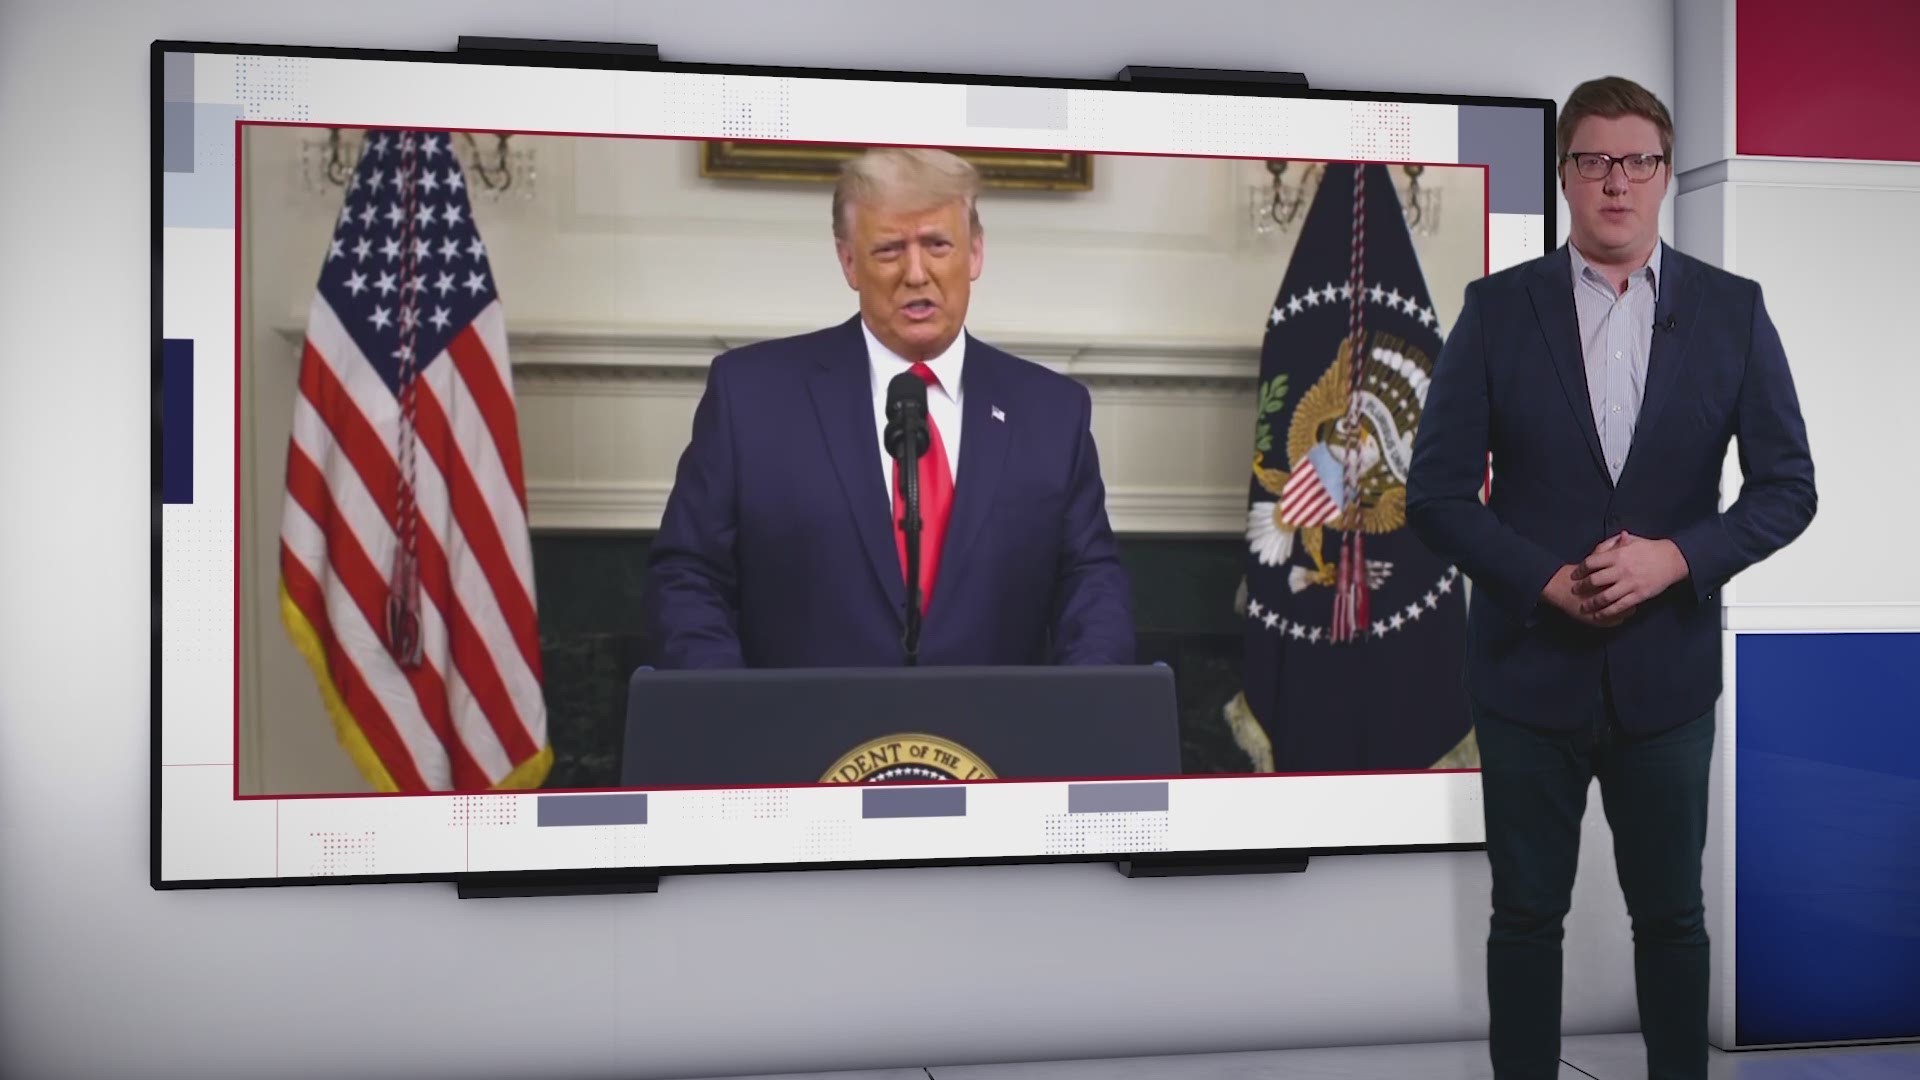 President Donald Trump made several claims about the 2020 election during a video he posted to social media Wednesday.